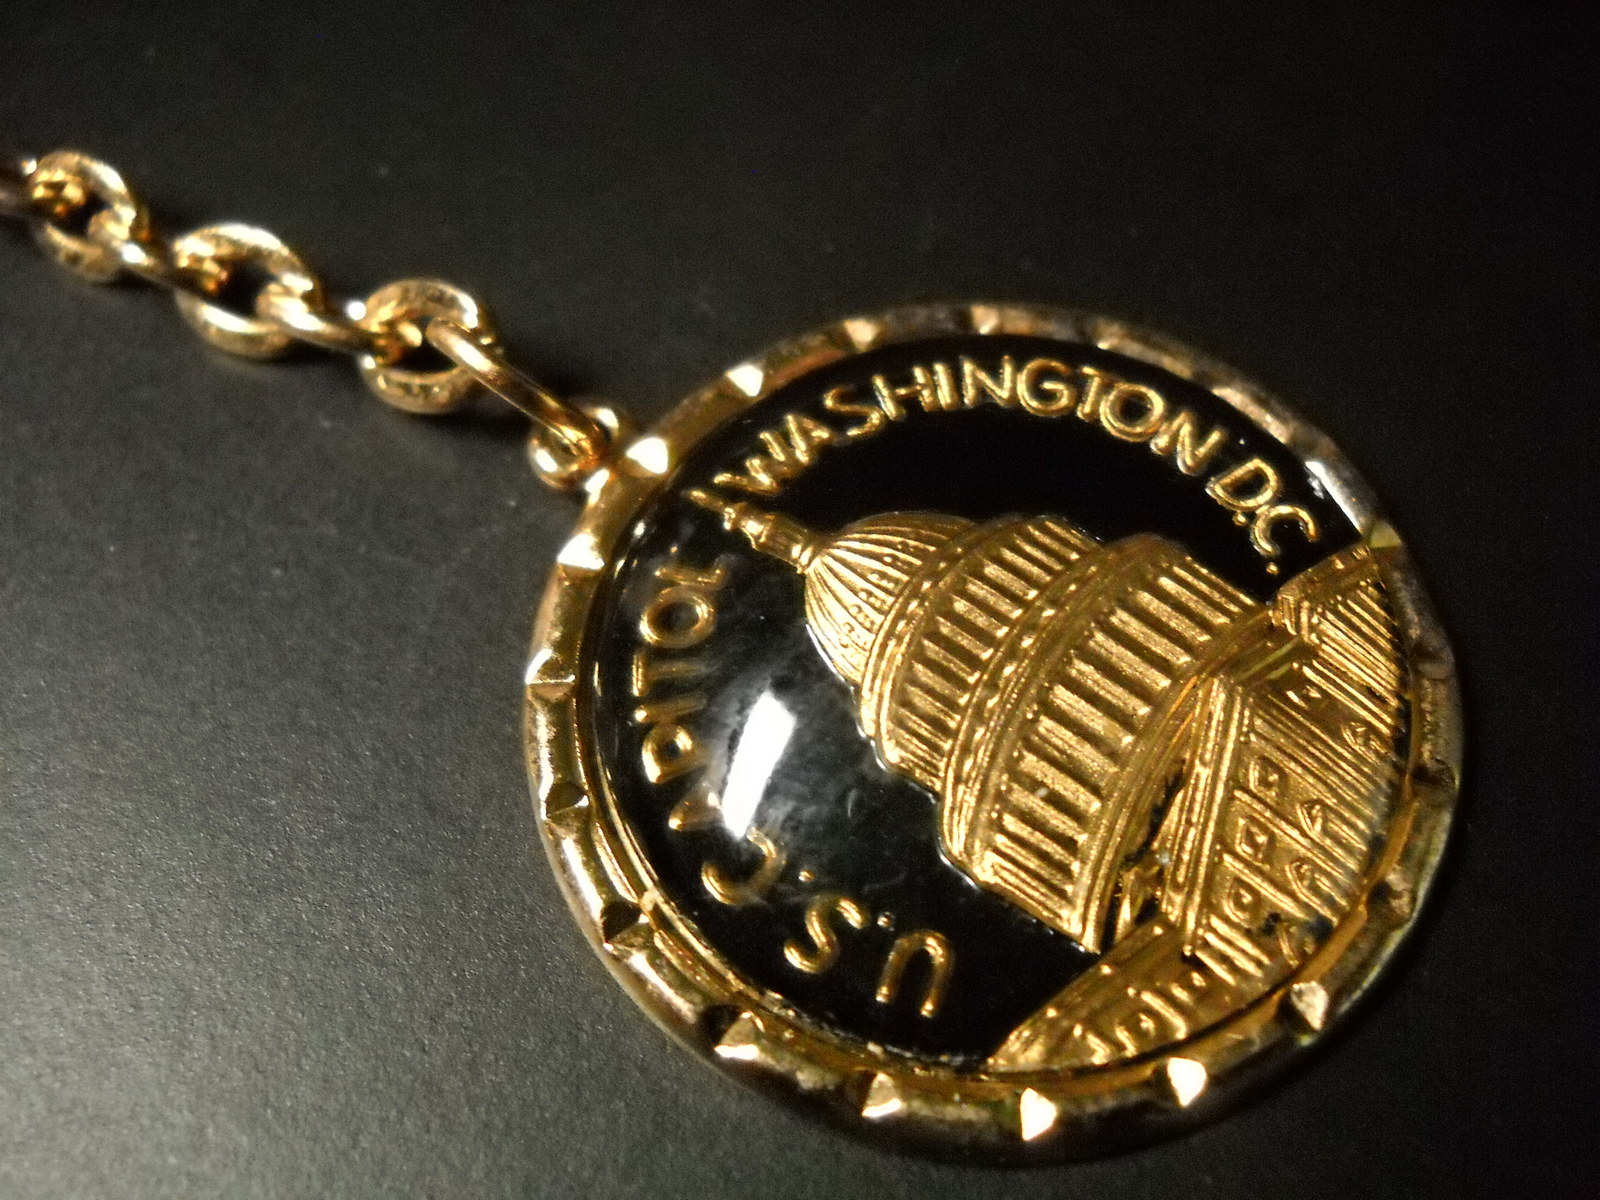 US Capitol Washington DC Key Chain Capitol Building Gold Colored Metal on Black - £5.58 GBP